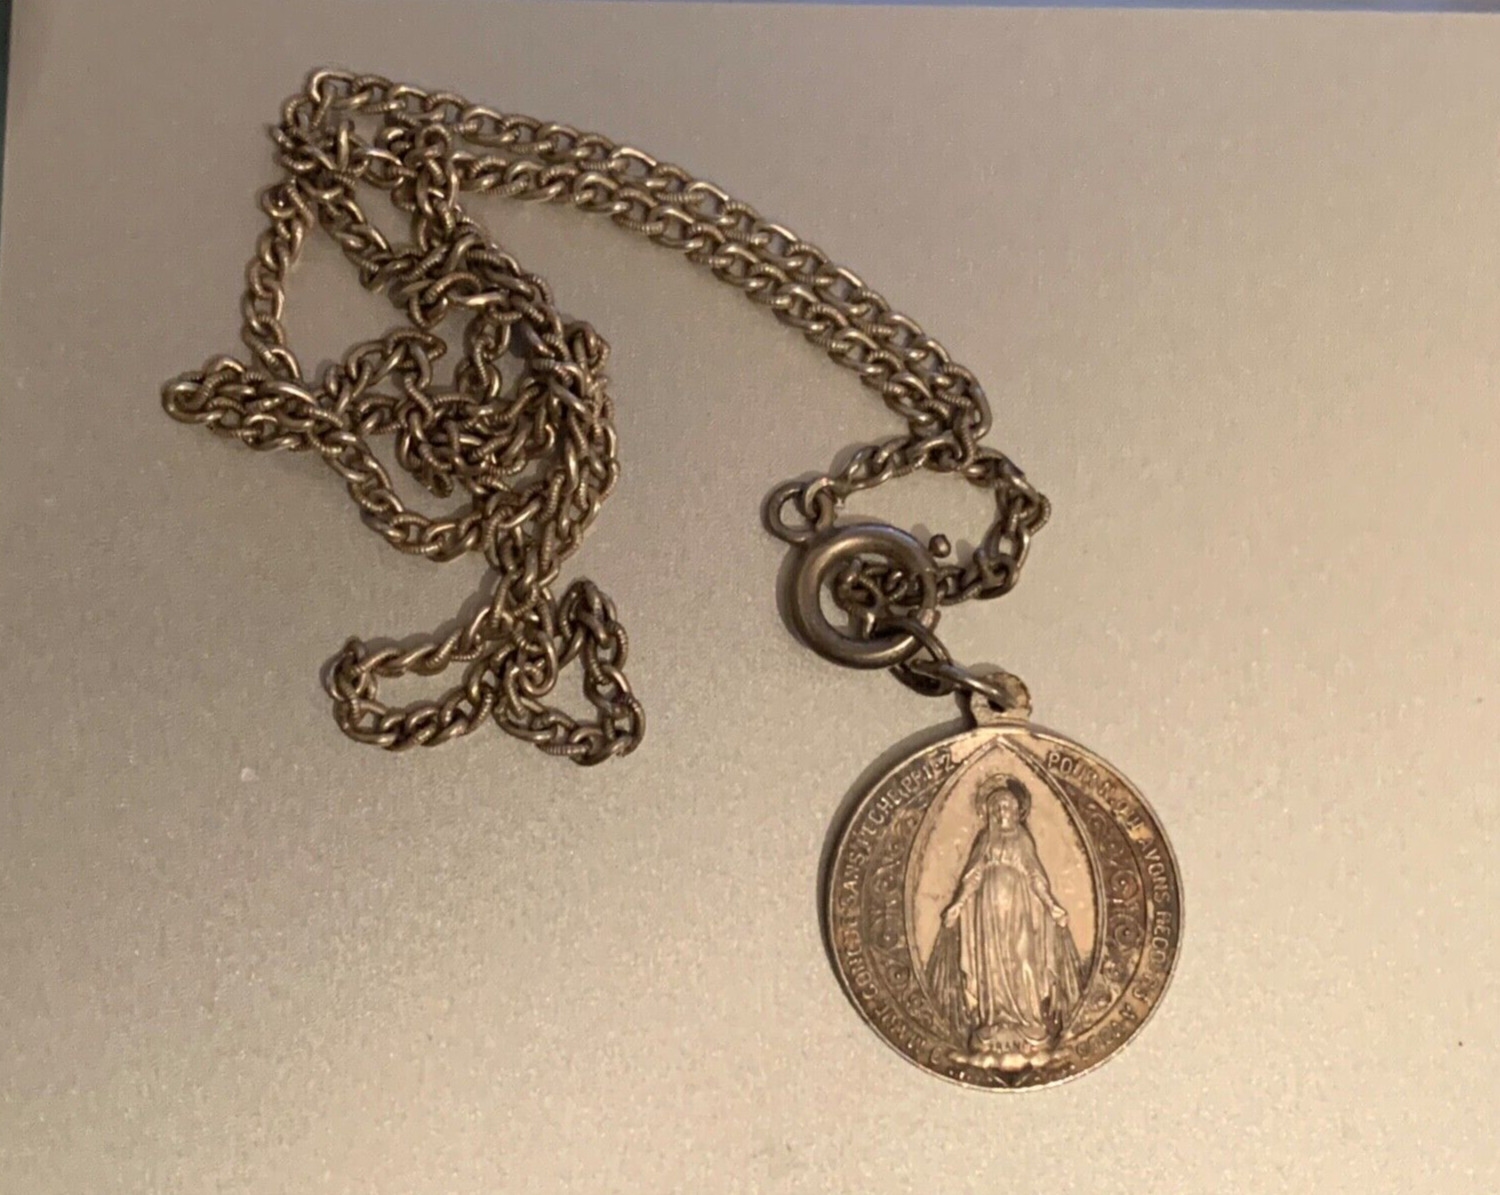 ANTIQUE French Sterling Silver Medal + Chain -Hallmark Signed L.Penin 1830-1868